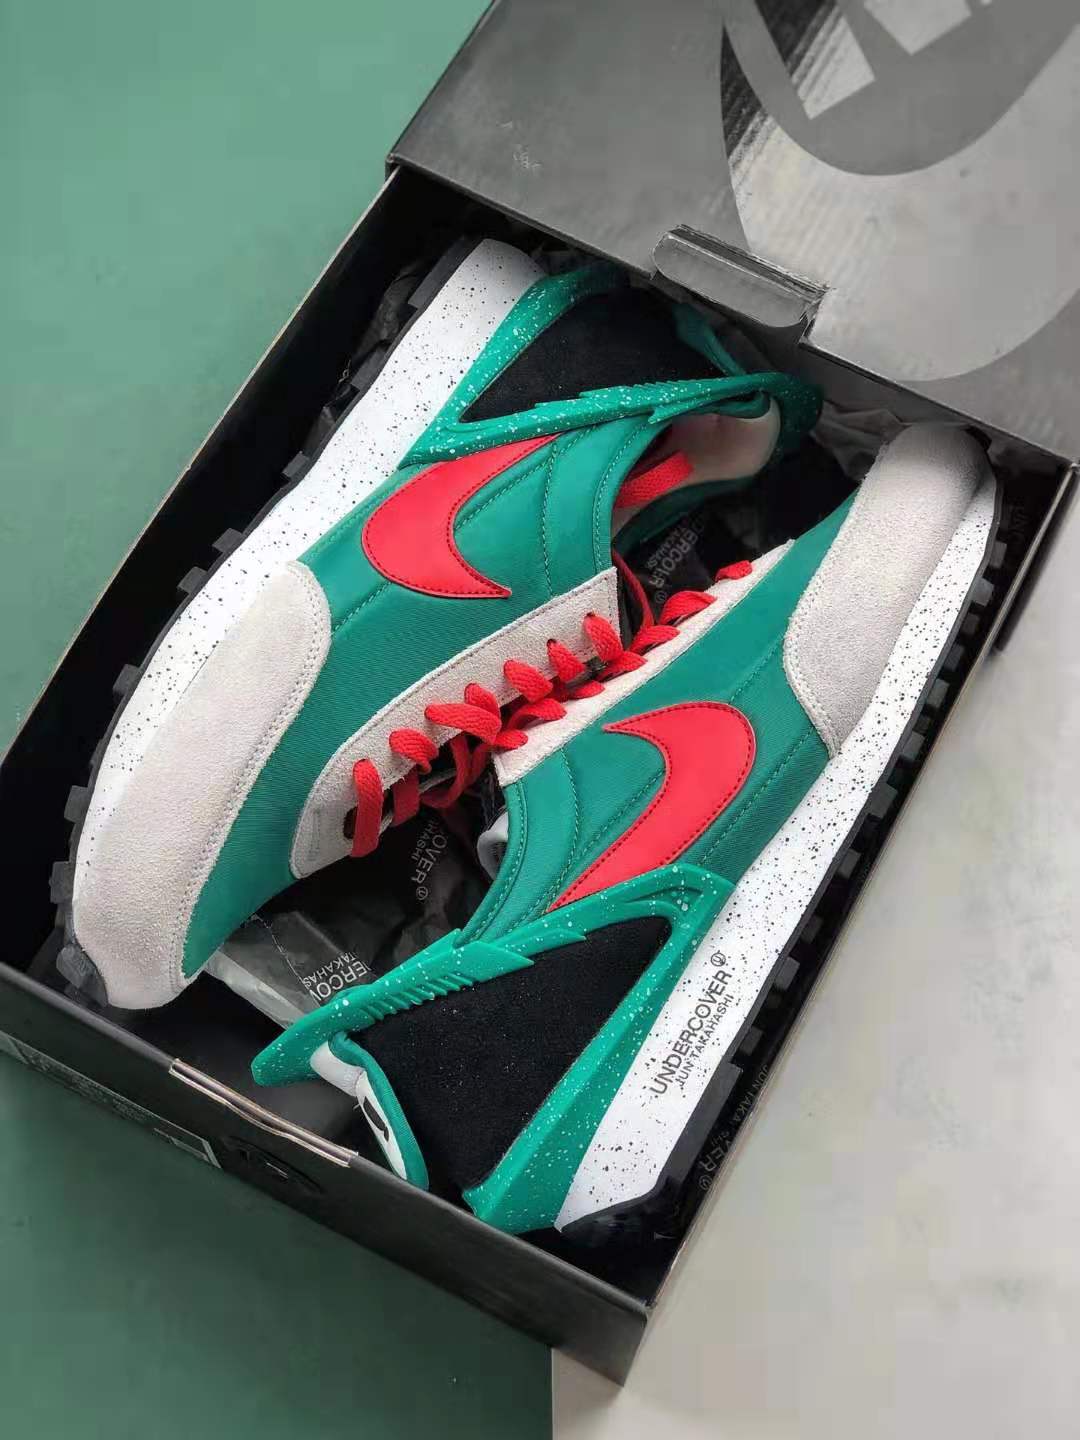 Undercover x Nike Waffle Racer Grass Green Grey Red - Limited Edition